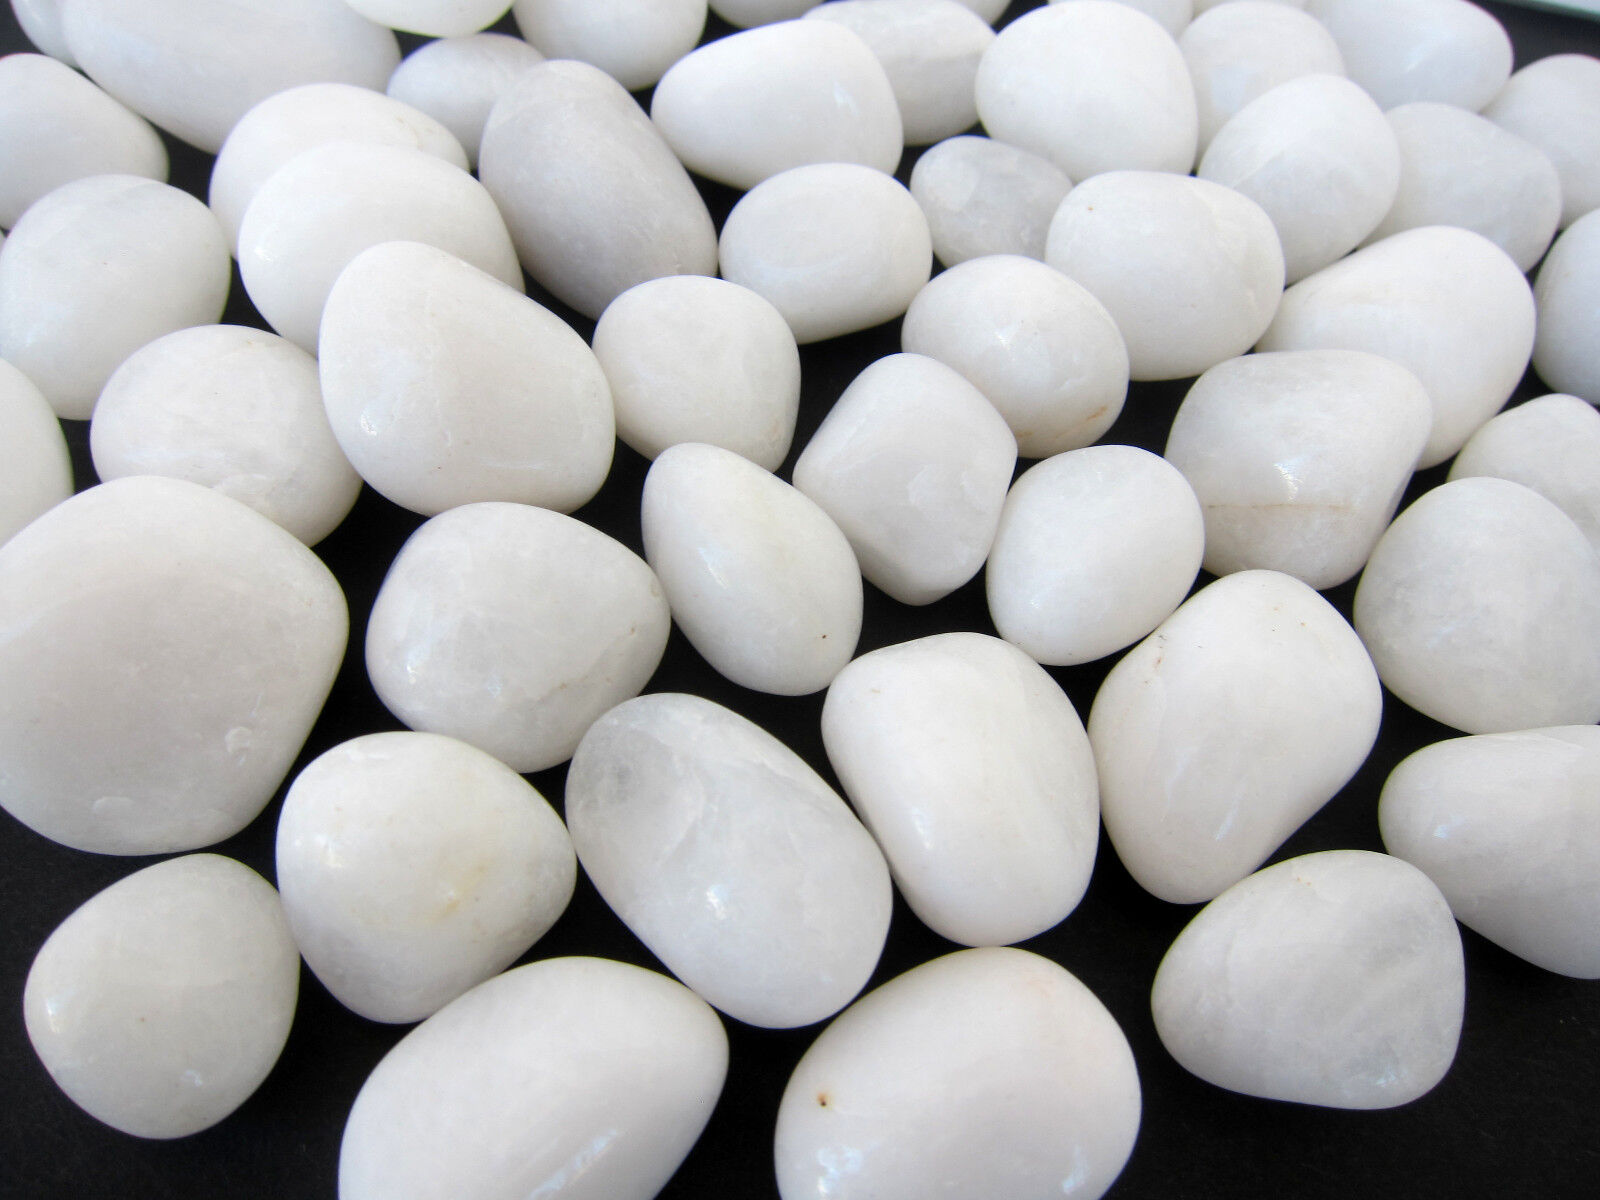 1x White Pearl Agate Tumbled Stones 20-25mm Healing Crystal Opens Crown Chakra